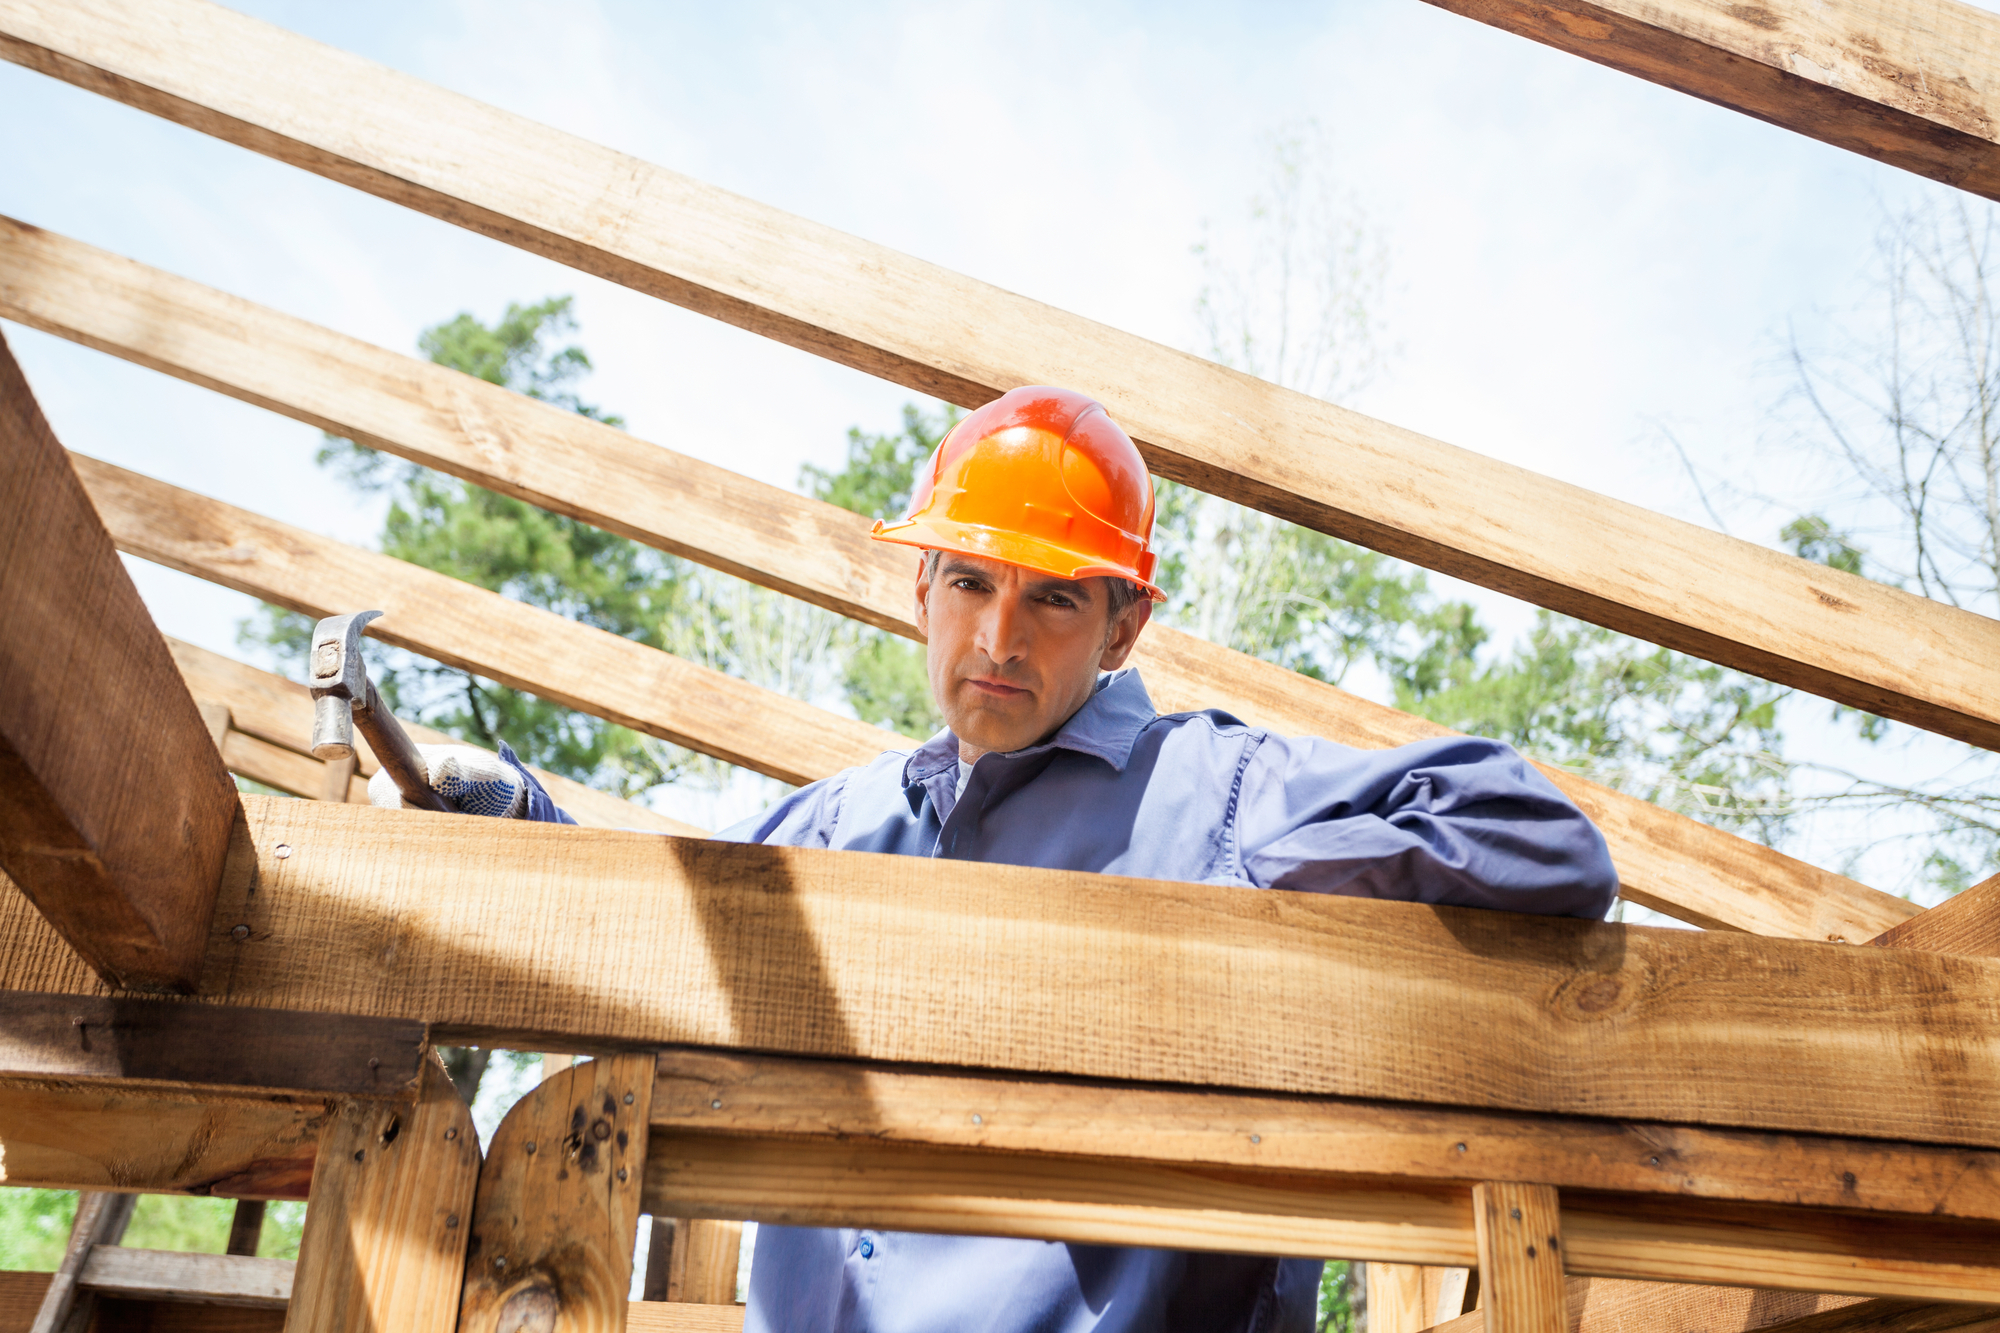 Confident Construction Worker Hammering Nail On Timber Frame